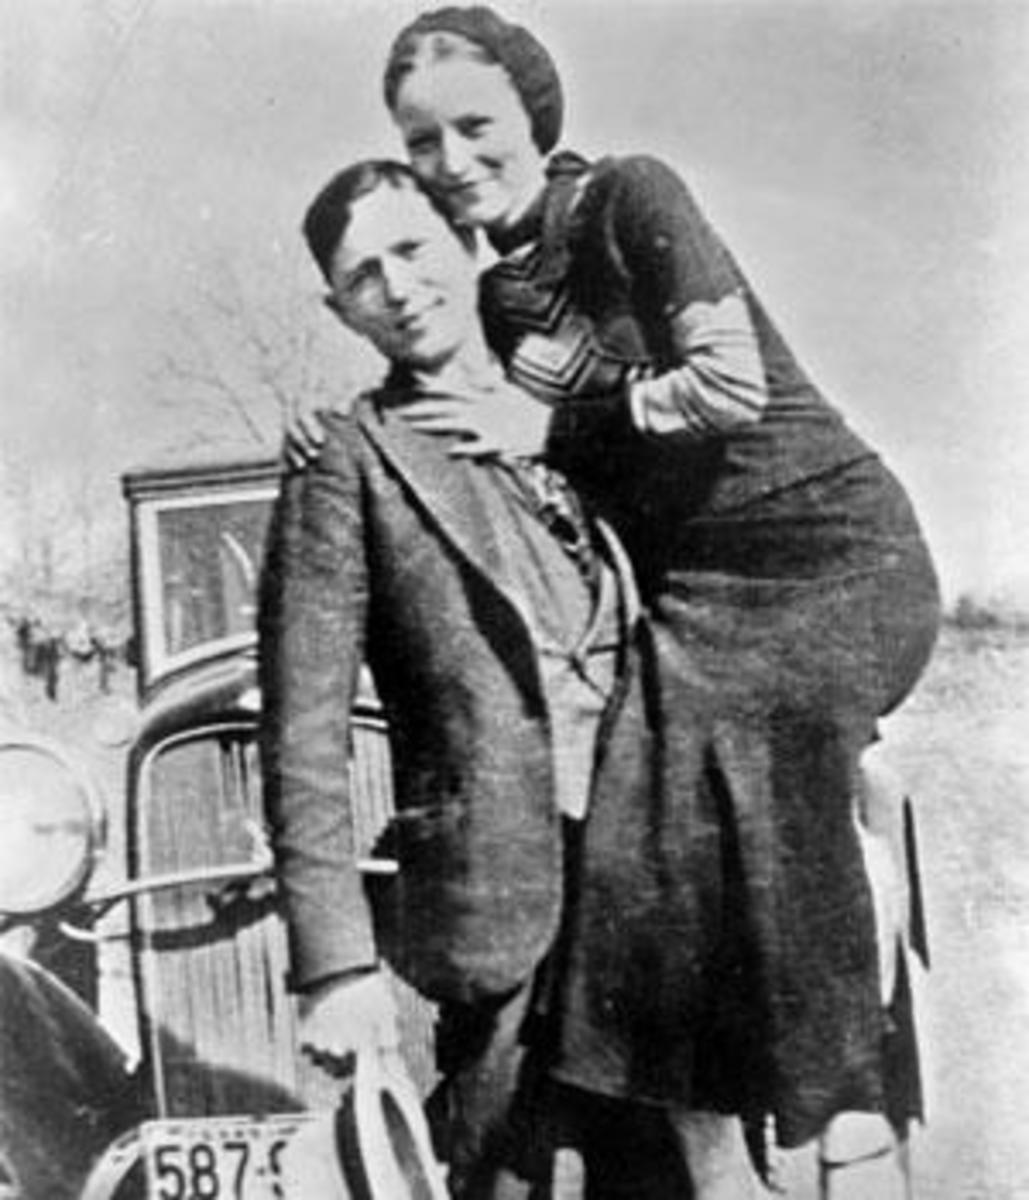 Bonnie Parker and Clyde Barrow in a photograph from the early 1930s. (Library of Congress)